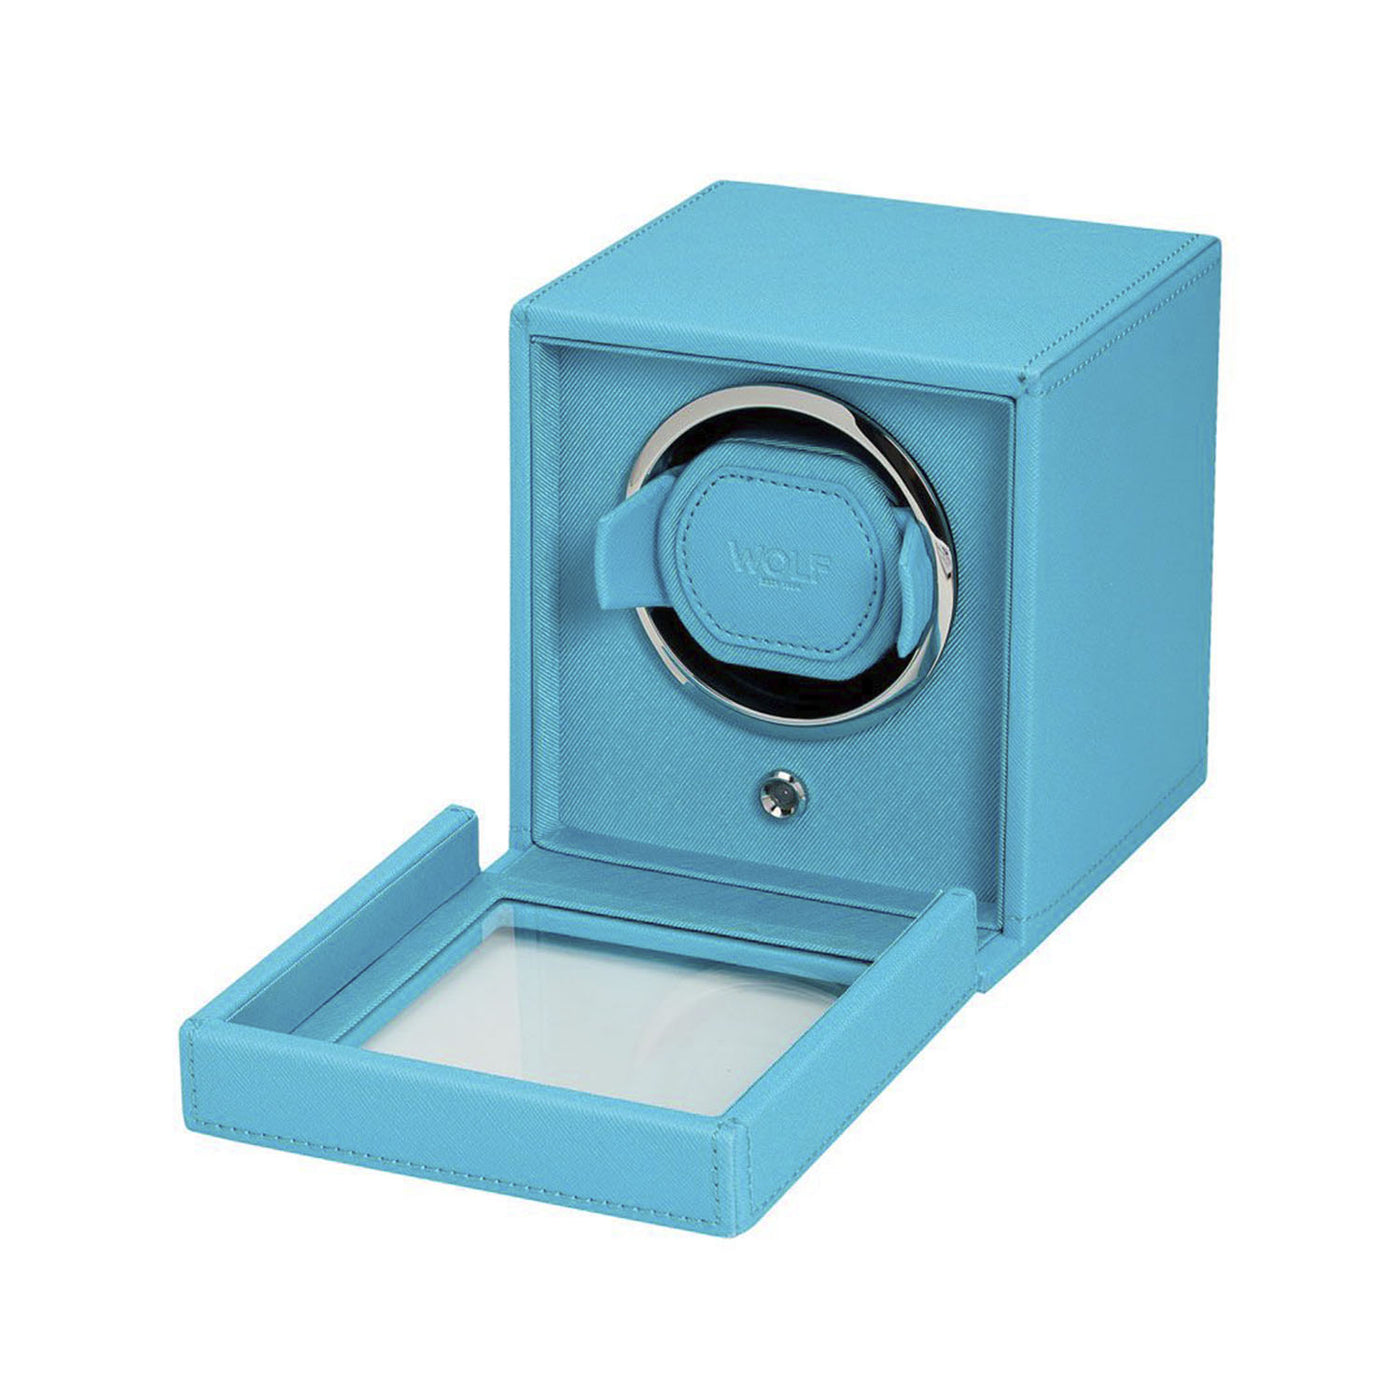 Wolf 1834 Cub Single Watch Winder with cover – 461124